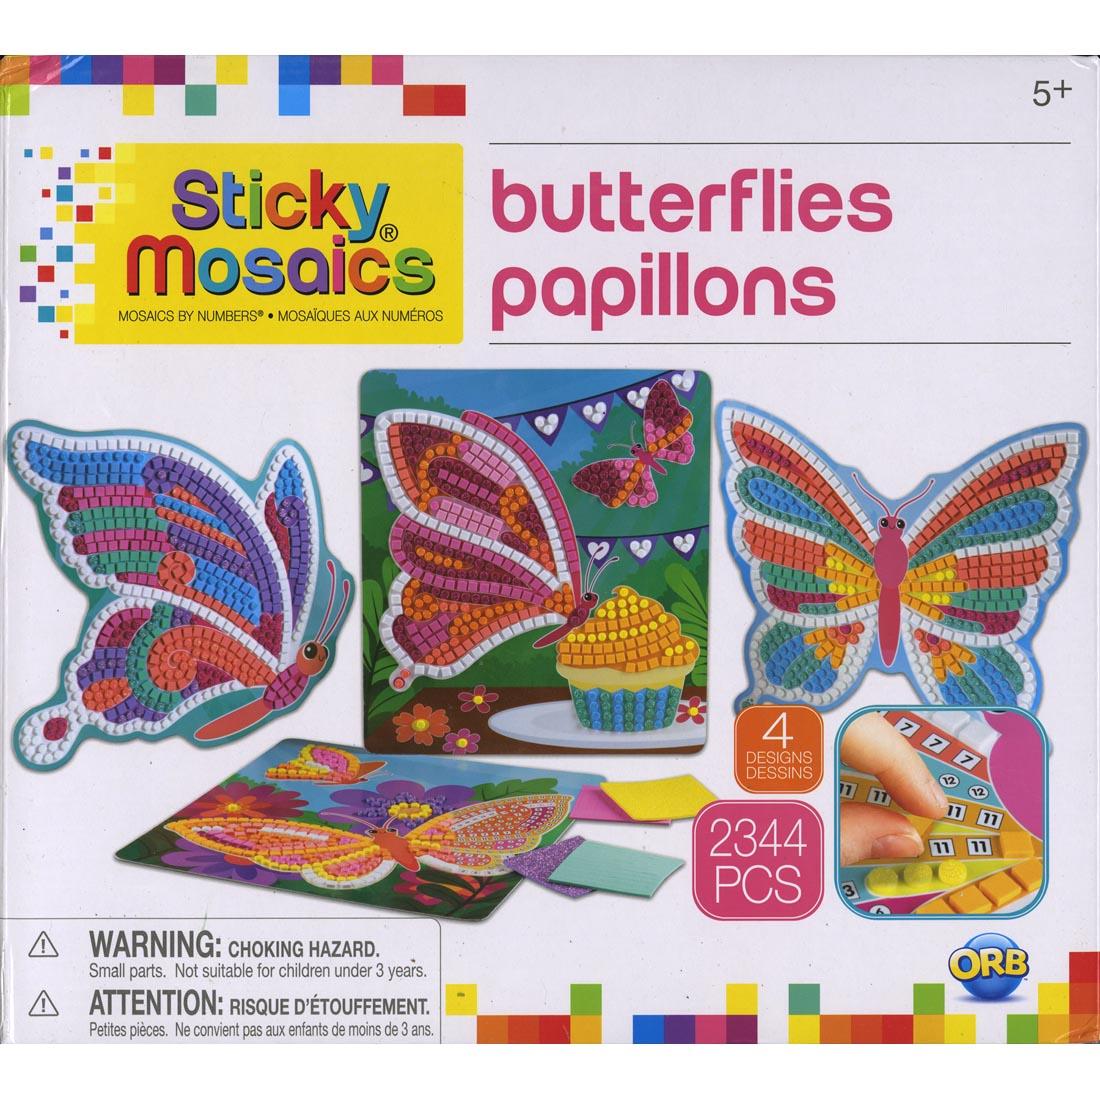 box of adhesive-backed foam mosaic crafts, featuring 4 different butterfly designs